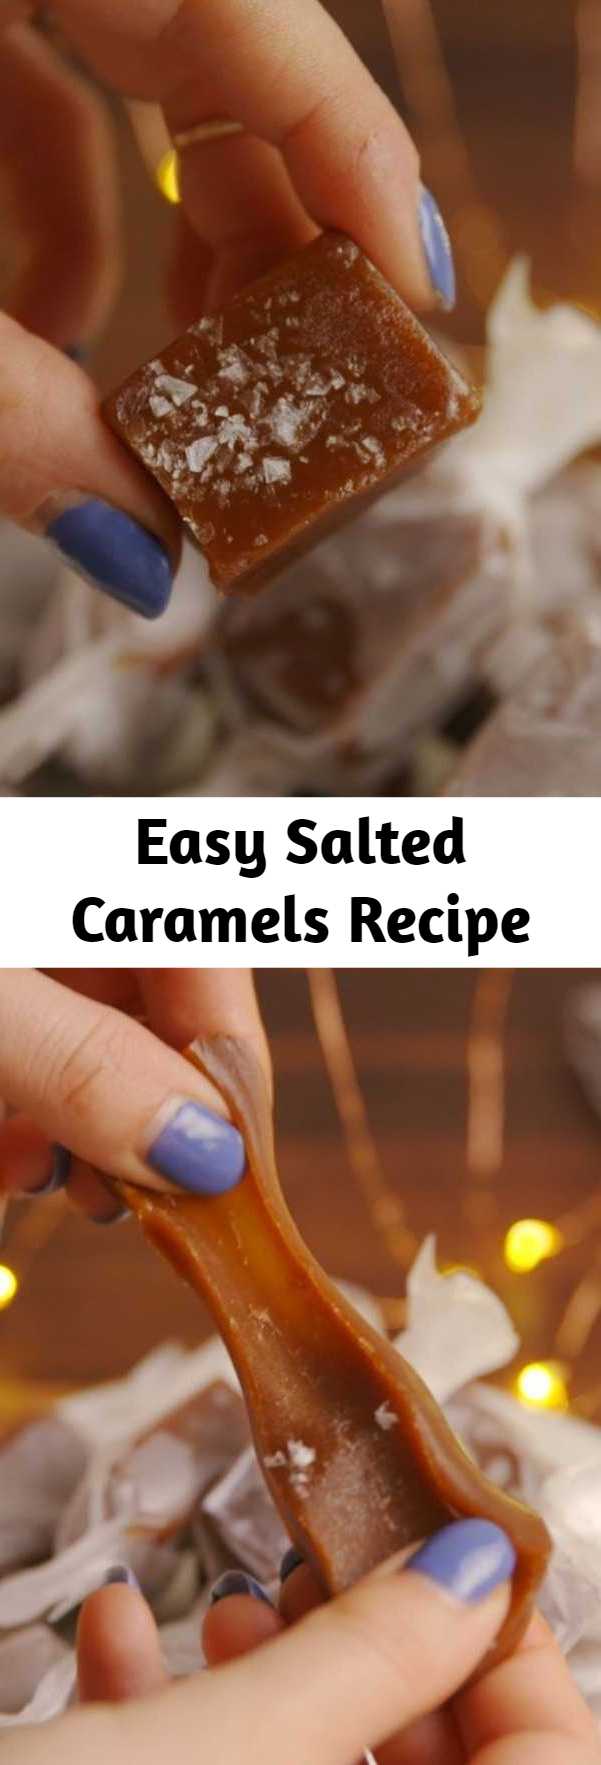 Easy Salted Caramels Recipe - Gift Salted Caramels and be forever loved. #food #pastryporn #holiday #christmas #easyrecipe #recipe #gifts #wishlist #ideas #inspiration